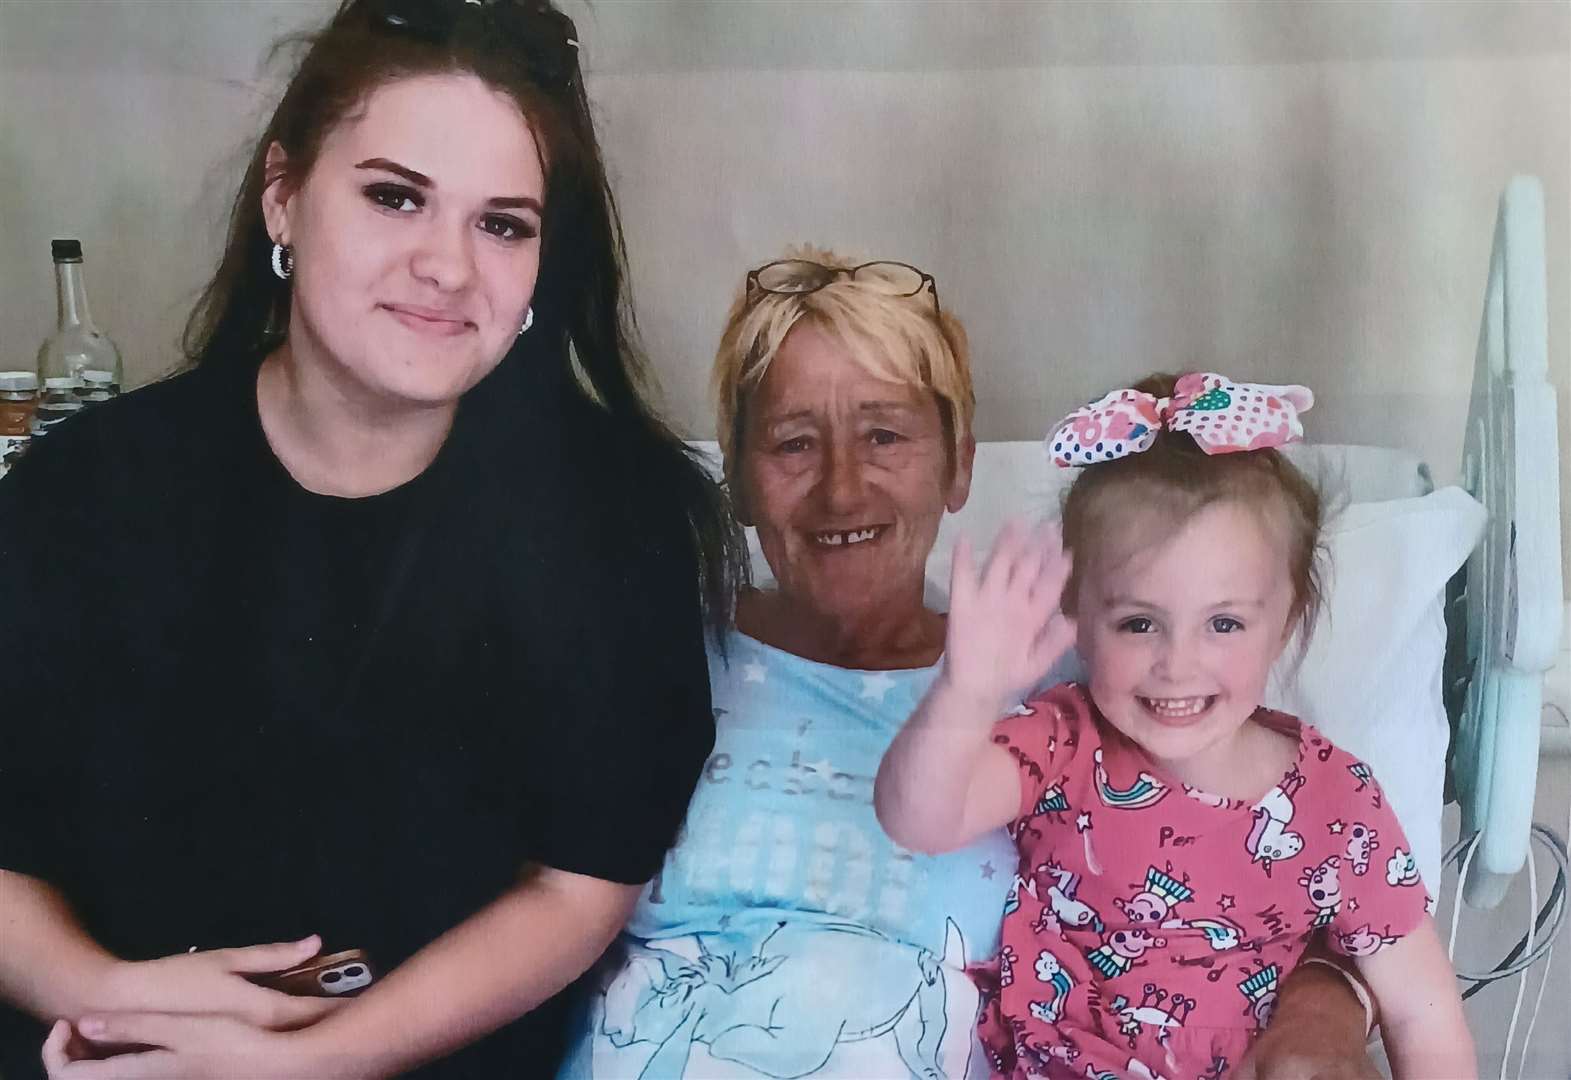 ‘I’m relieved it’s me with cancer and no one else in my family’